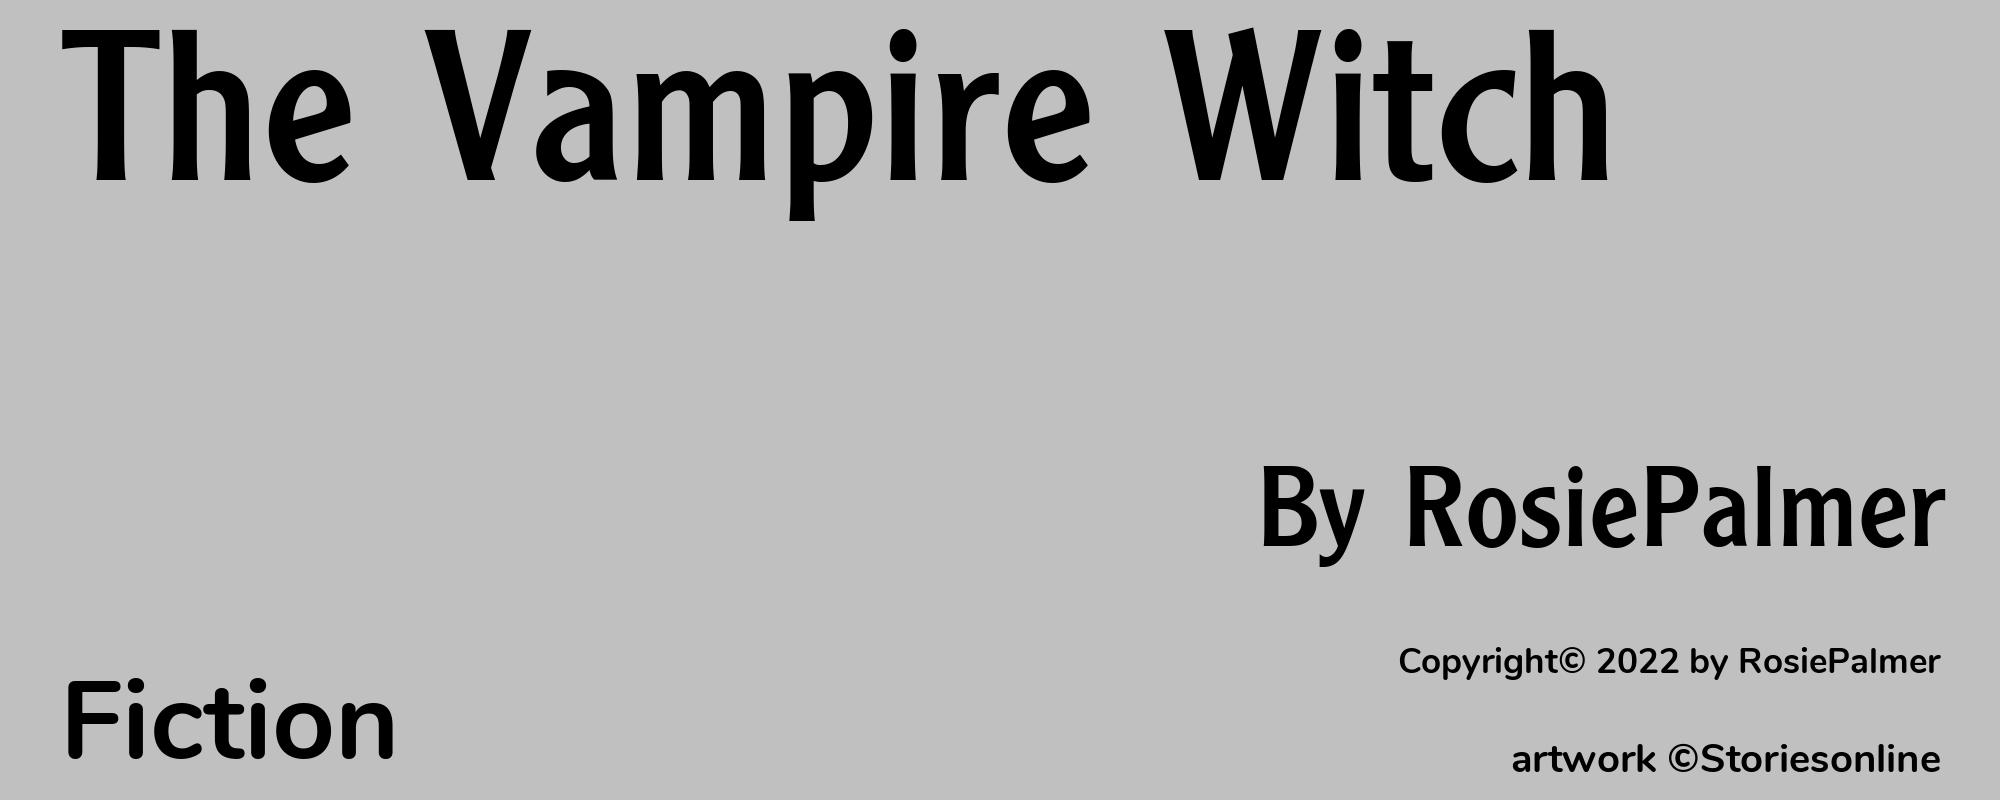 The Vampire Witch - Cover